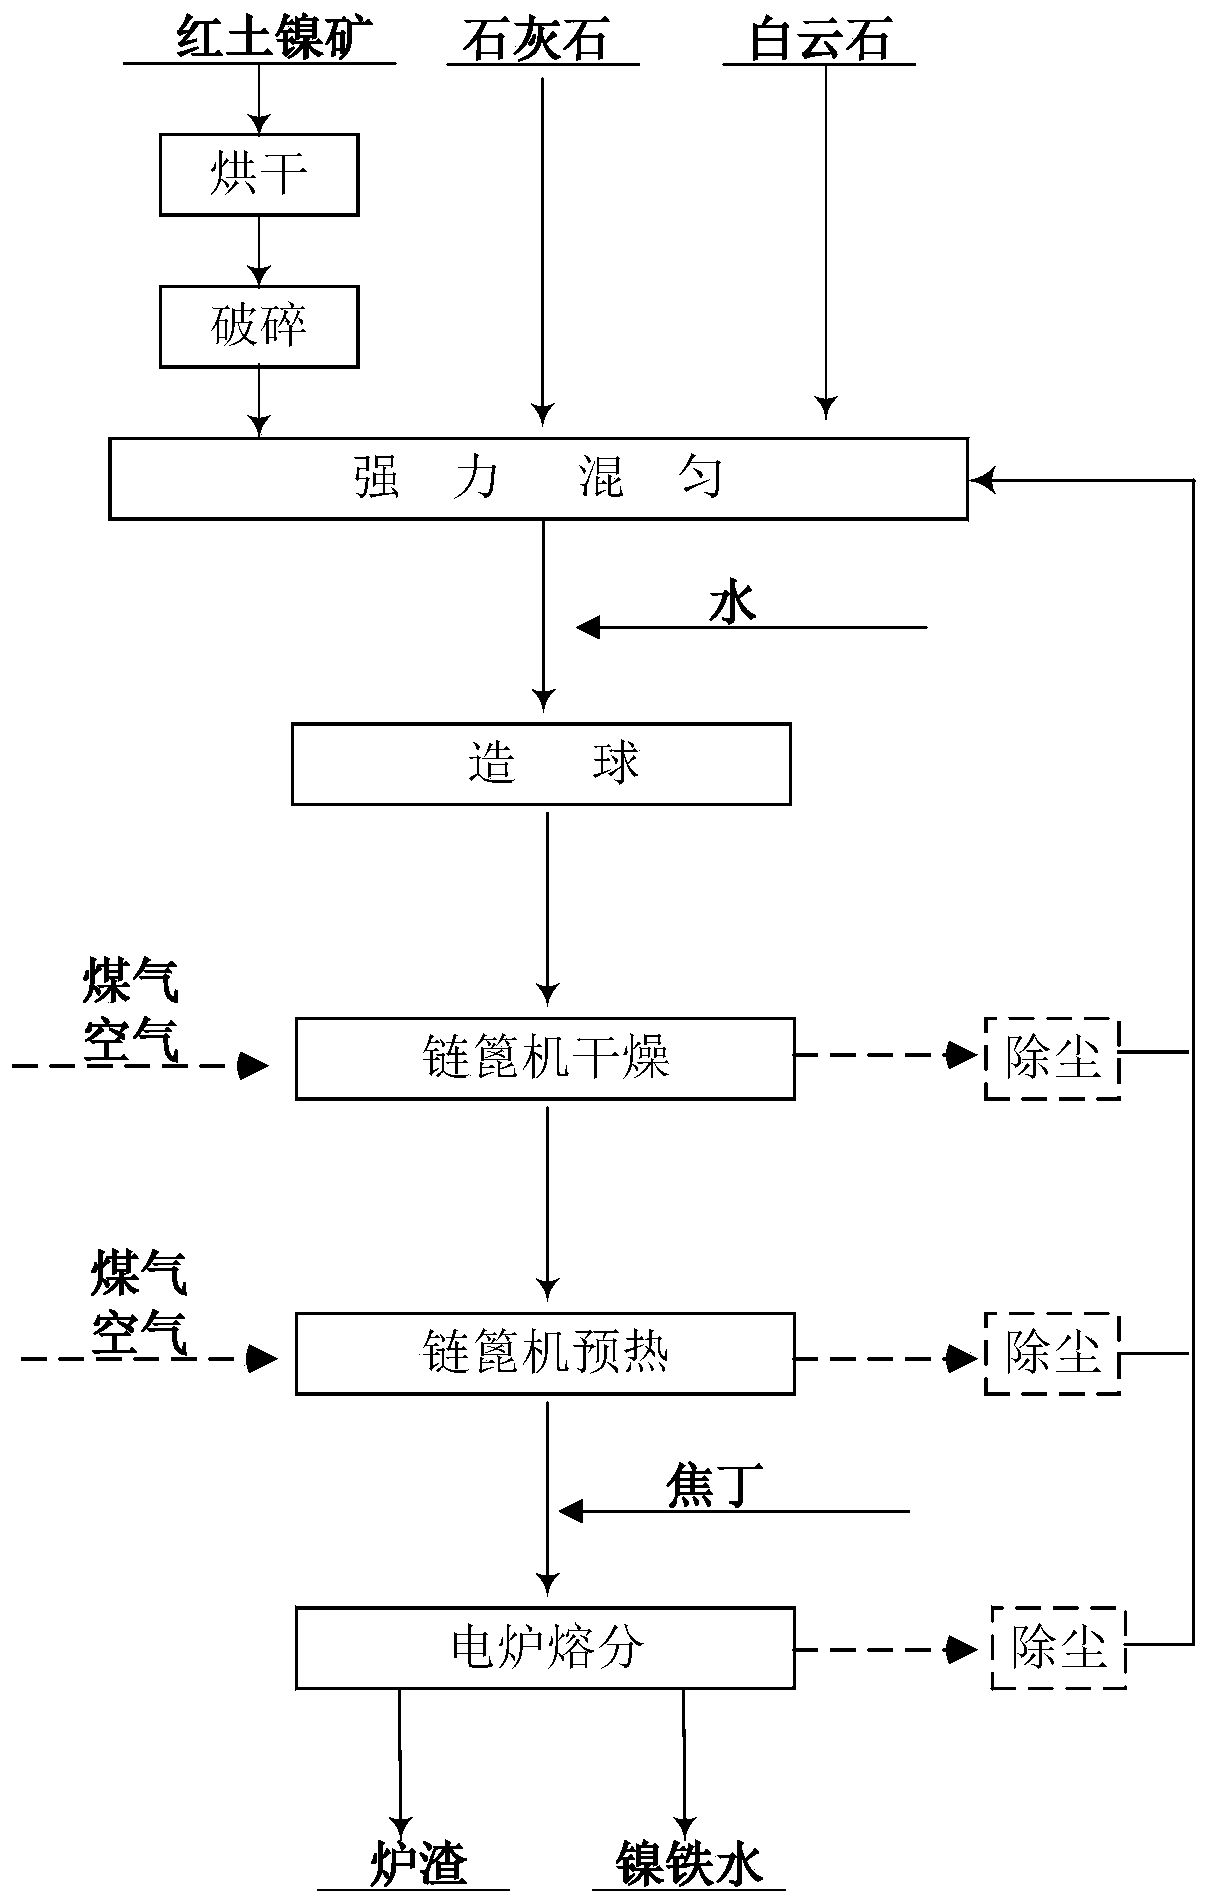 Method for preparing high-nickel molten iron from low-grade laterite-nickel ore by using chain grate machine preheating and electric furnace smelting separation